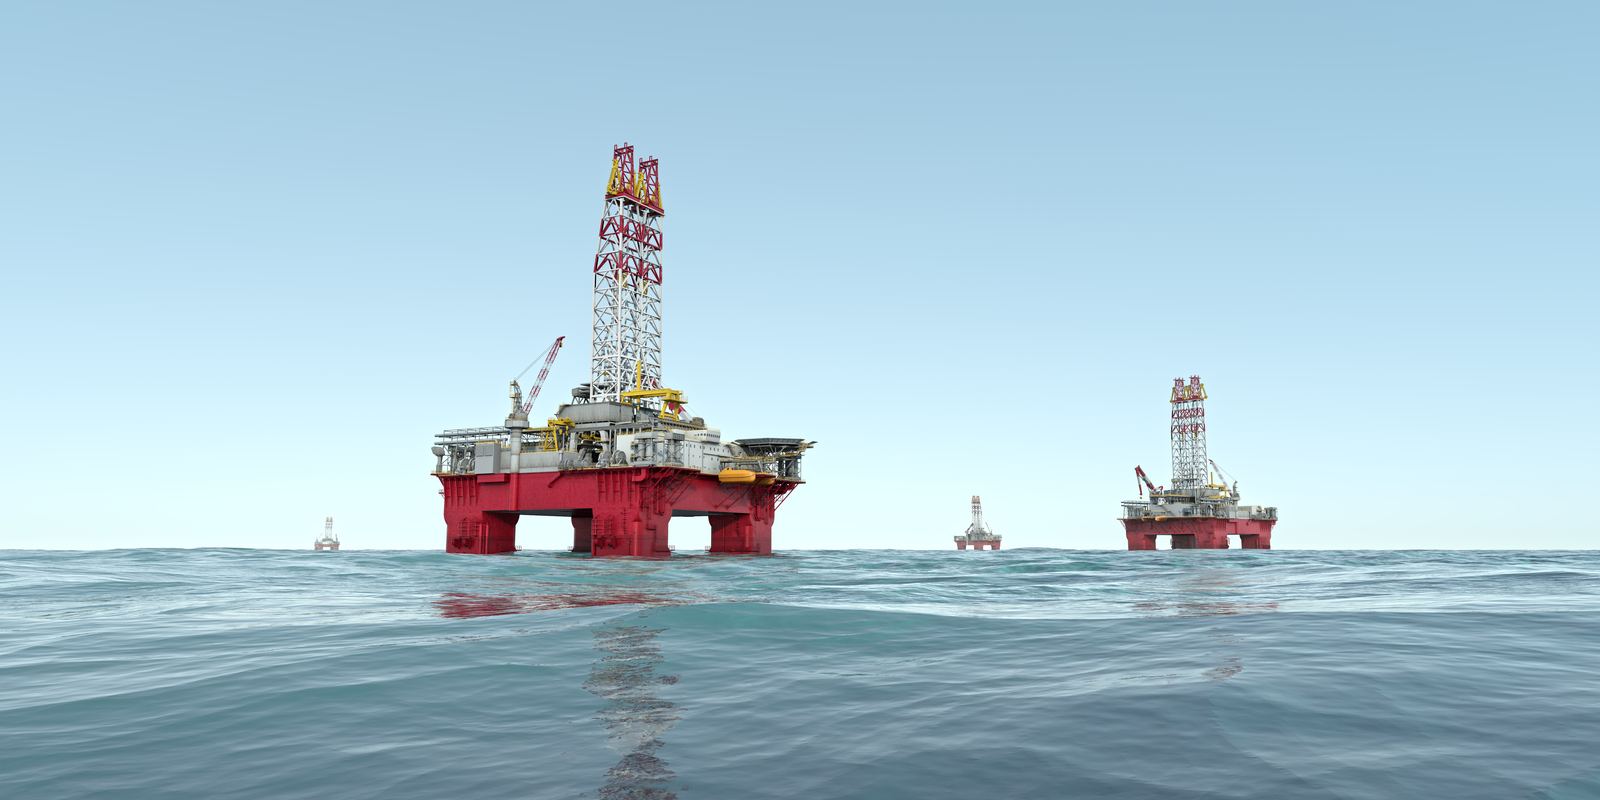 Offshore deep-water rigs